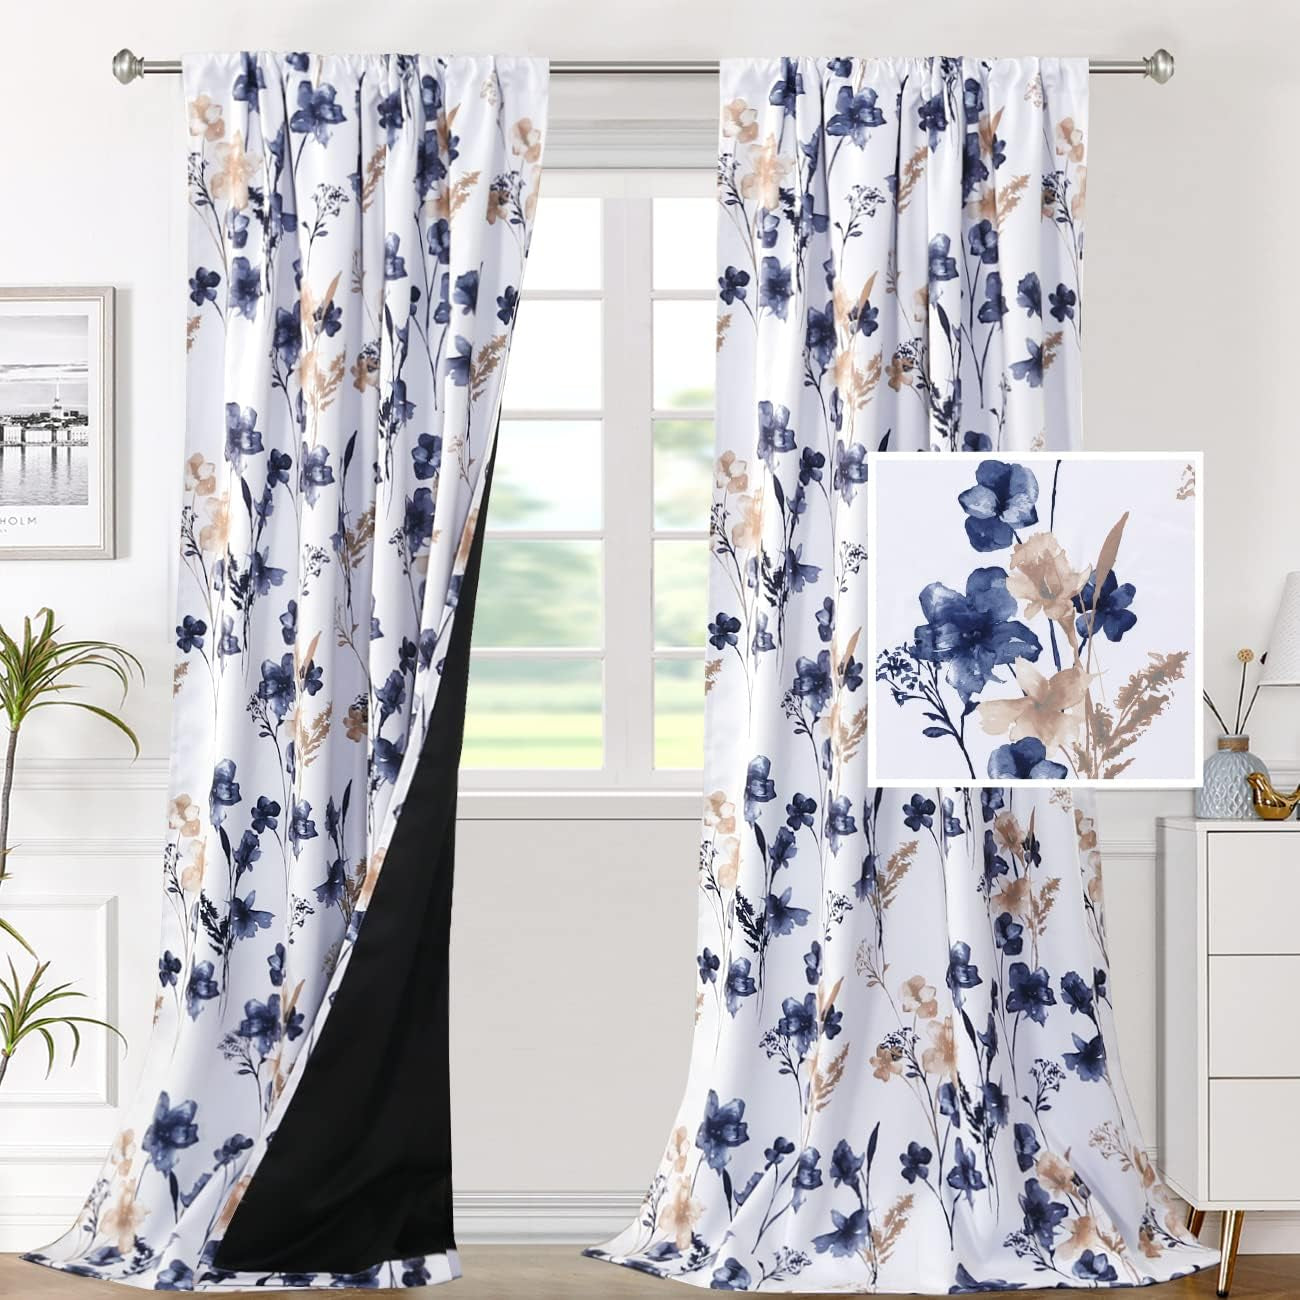 H.VERSAILTEX 100% Blackout Curtains for Bedroom Cattleya Floral Printed Drapes 84 Inches Long Leah Floral Pattern Full Light Blocking Drapes with Black Liner Rod Pocket 2 Panels, Navy/Taupe  H.VERSAILTEX Navy/Taupe 52"W X 96"L 